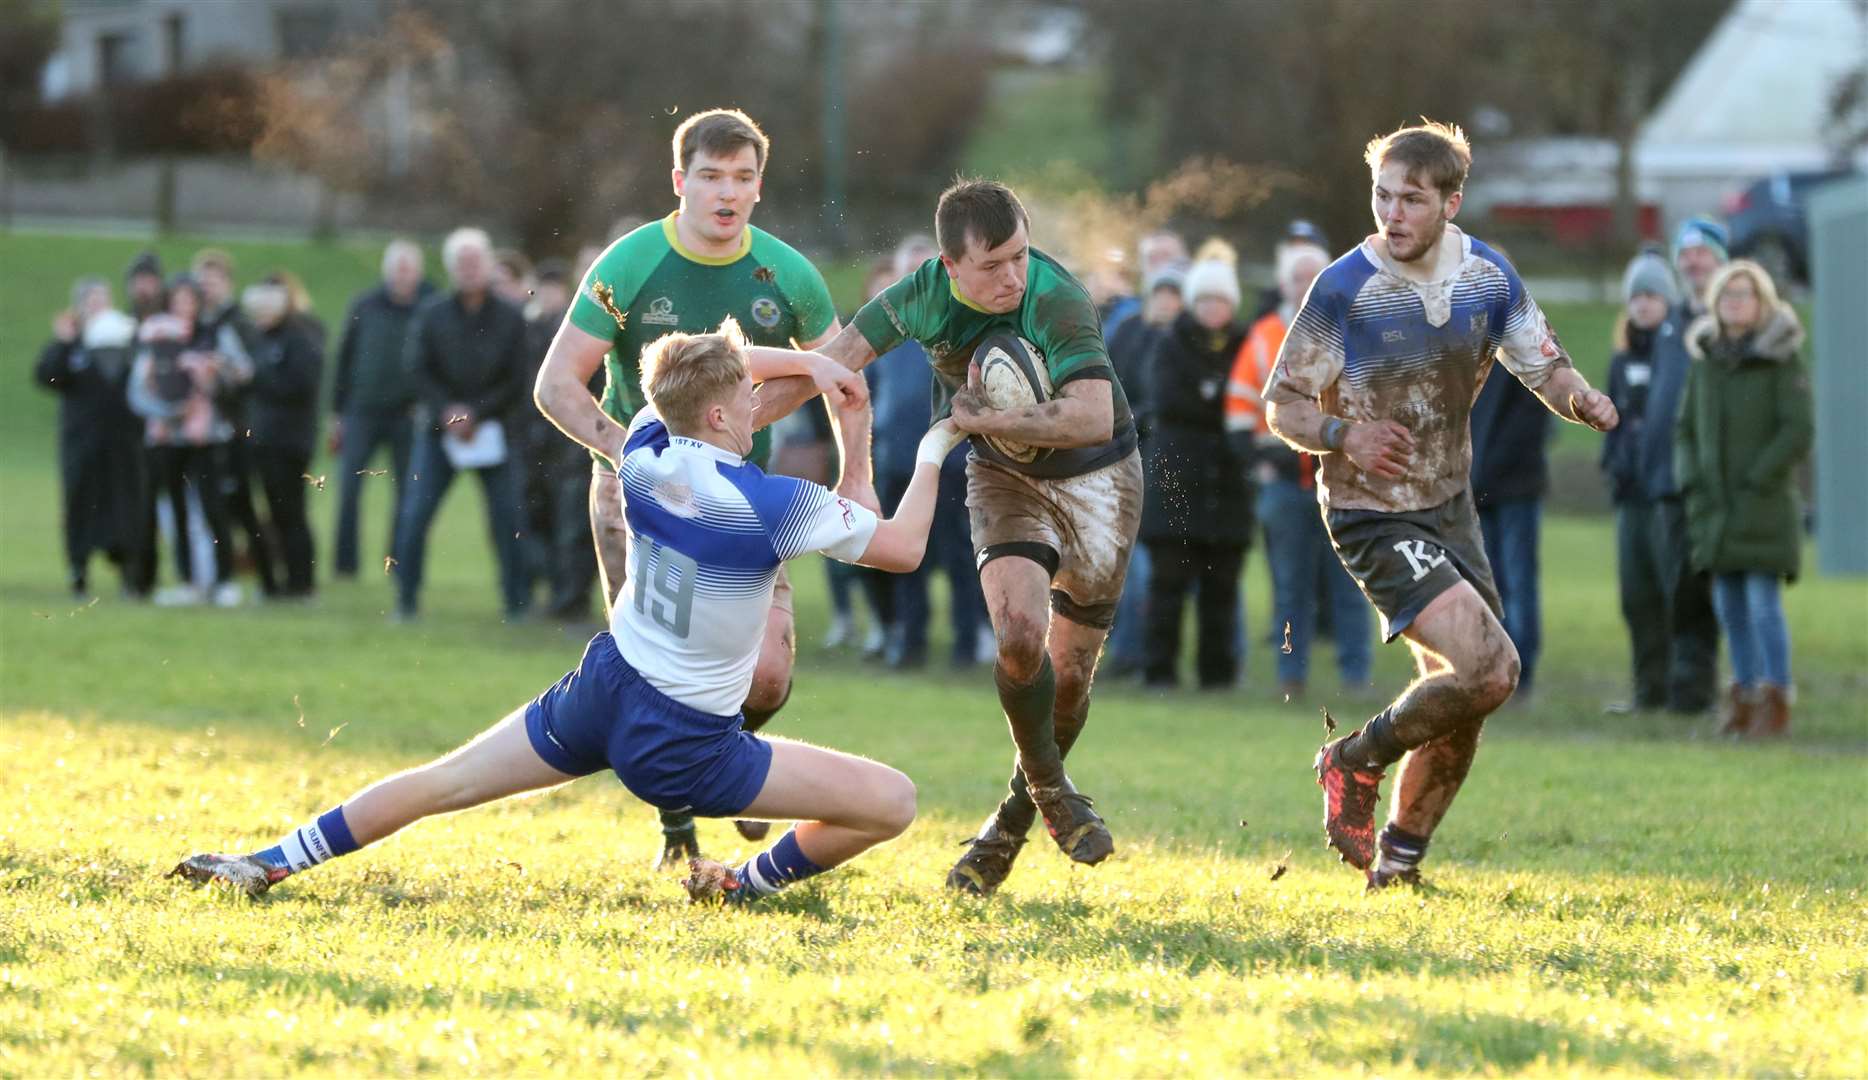 Scott Webster scored a couple of tries for the Greens. Picture: James Gunn